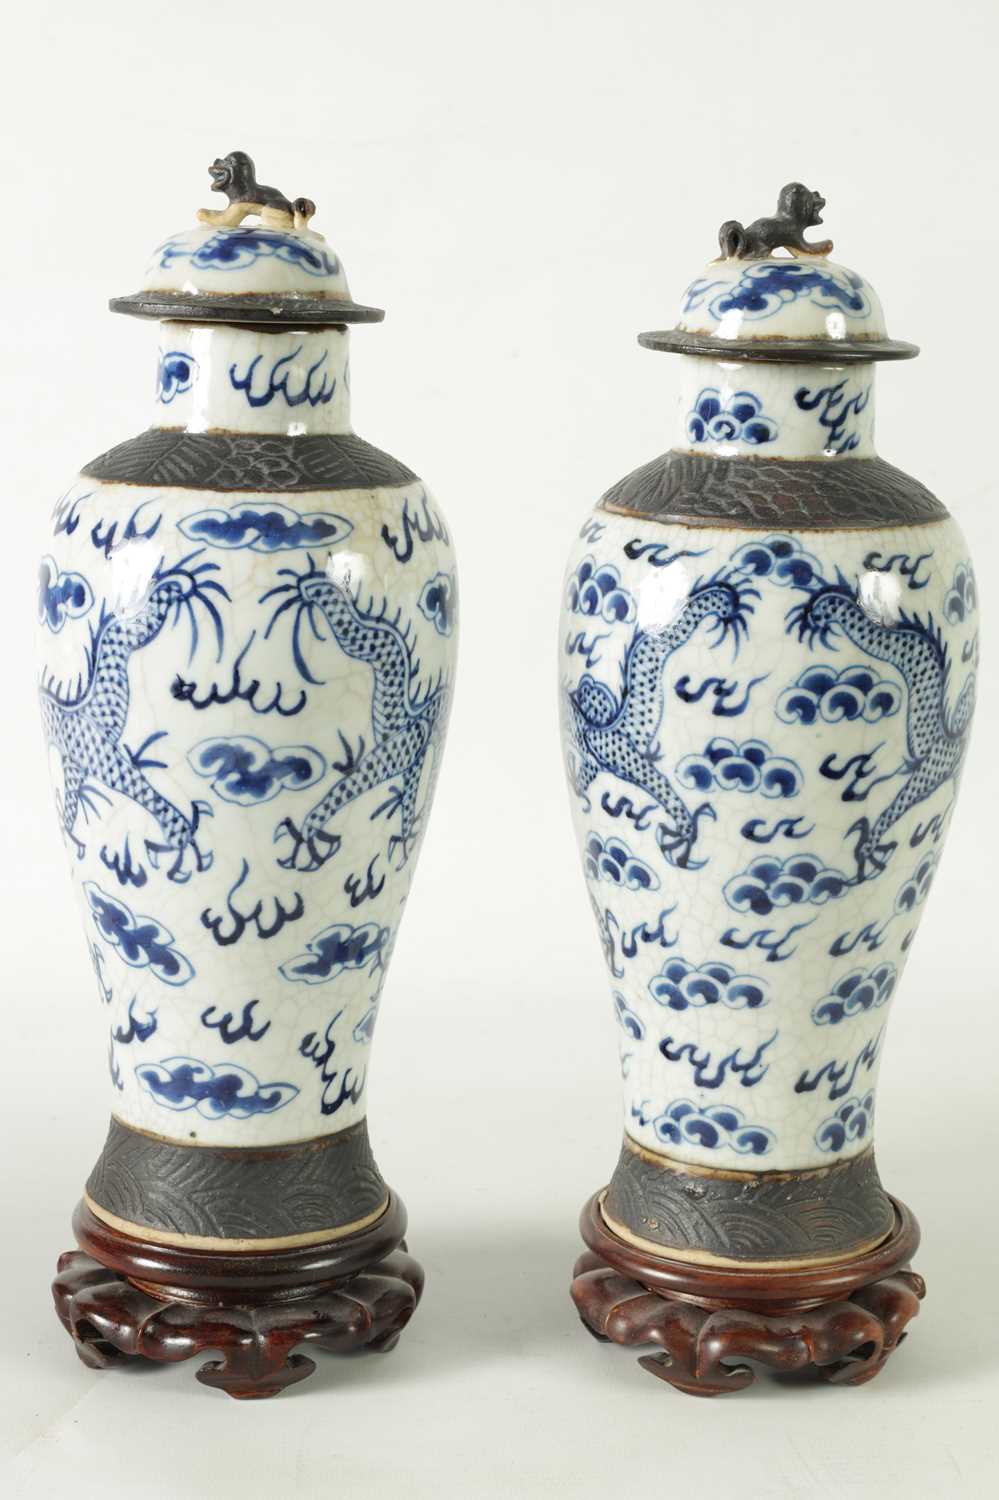 A PAIR OF 19TH CENTURY CHINESE CRACKLE GLAZE LIDDED VASES - Image 8 of 11